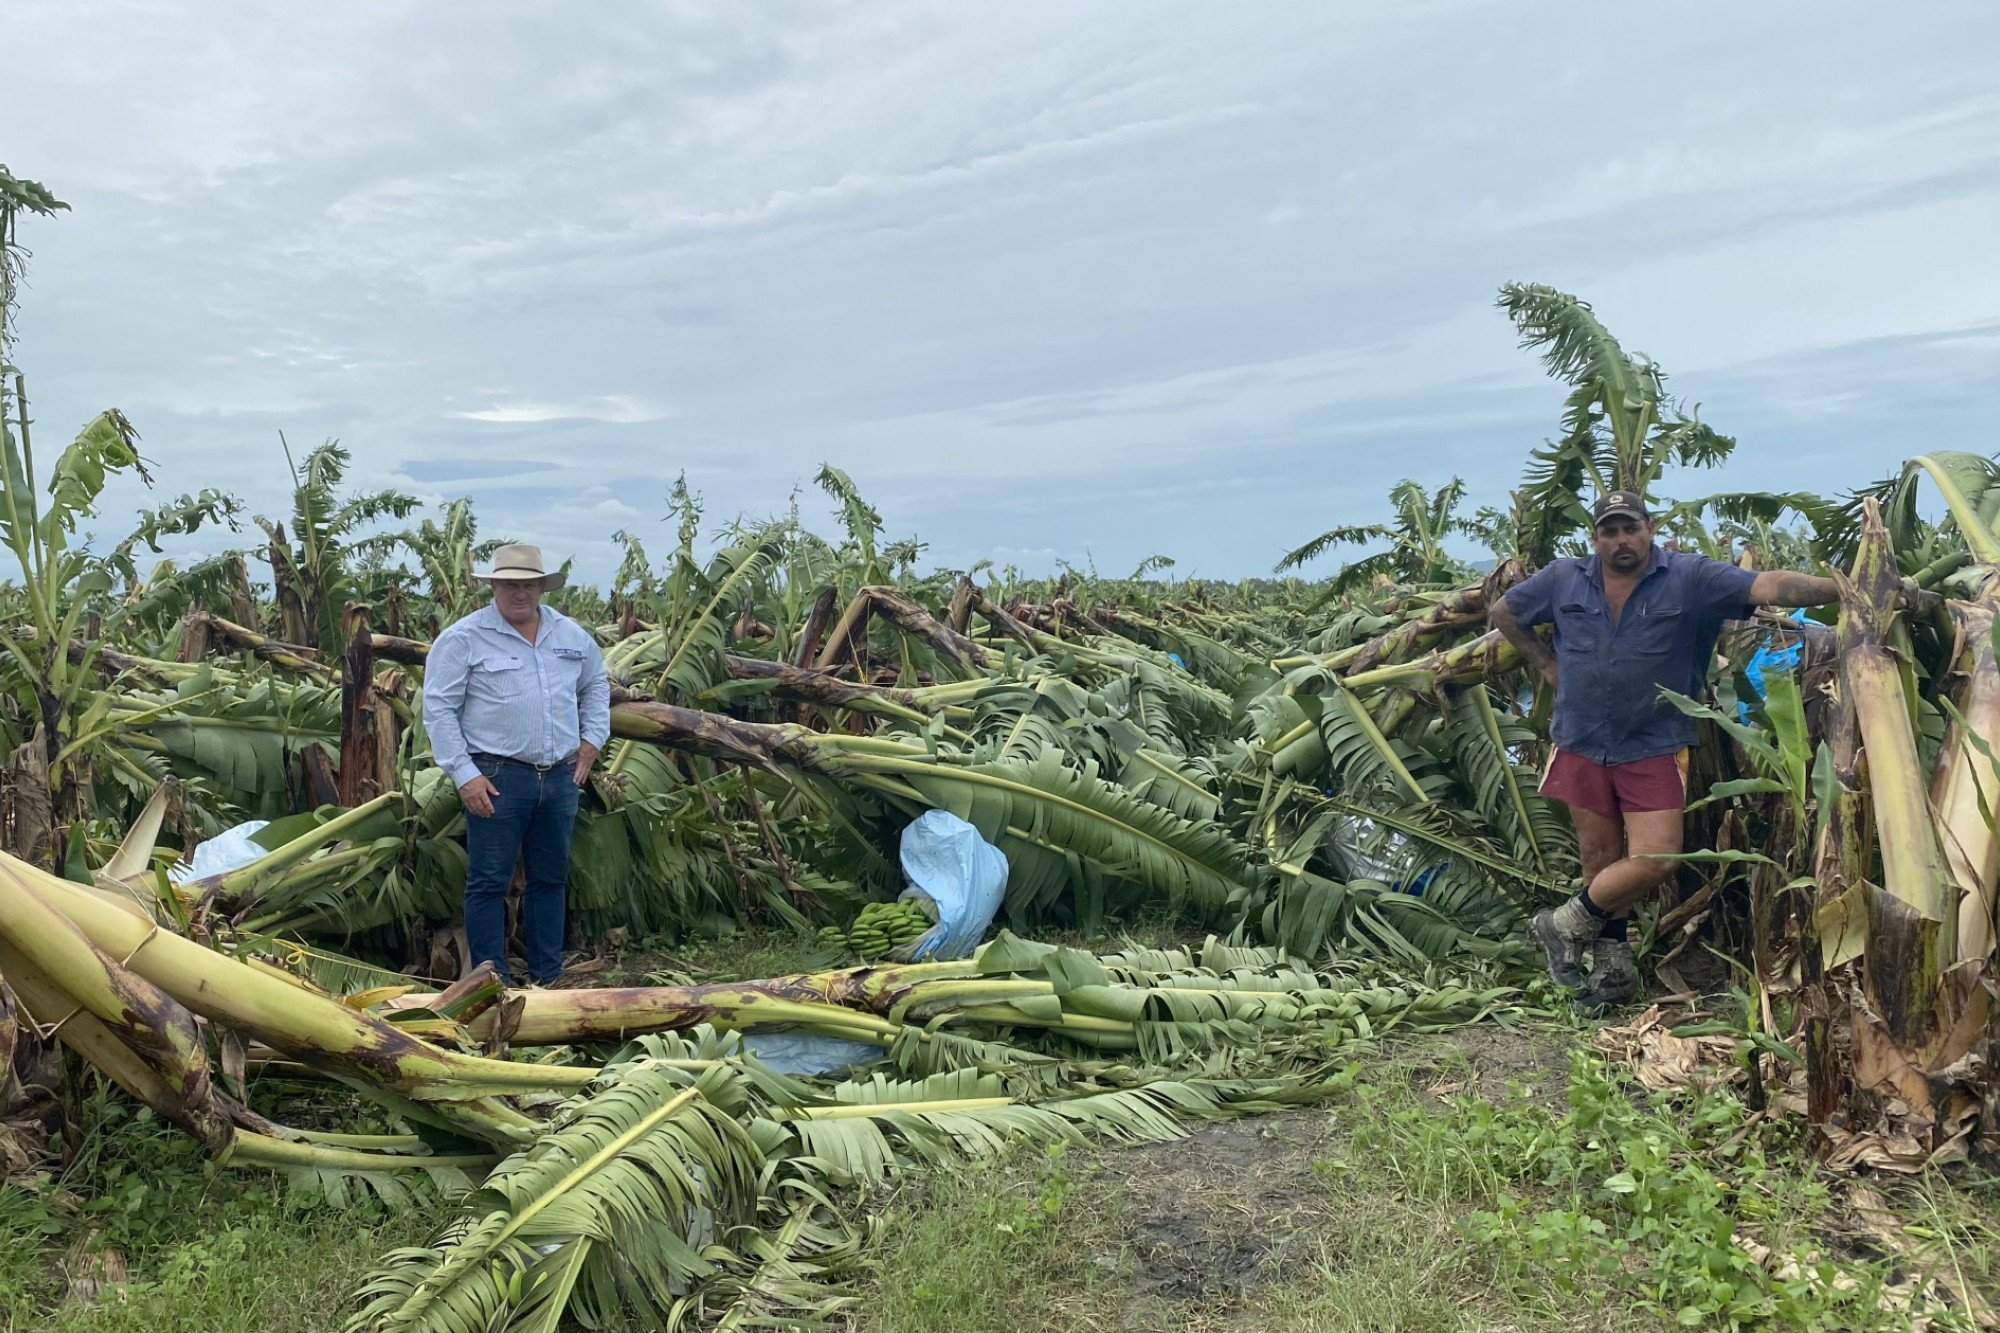 Around 95% of damage to northern banana farms has occurred in the Hill electorate. Member for Hill, Shane Knuth inspects the carnage caused by TC Niran with Nathan Puccini, who suff ered huge losses in his Cowley banana plantation